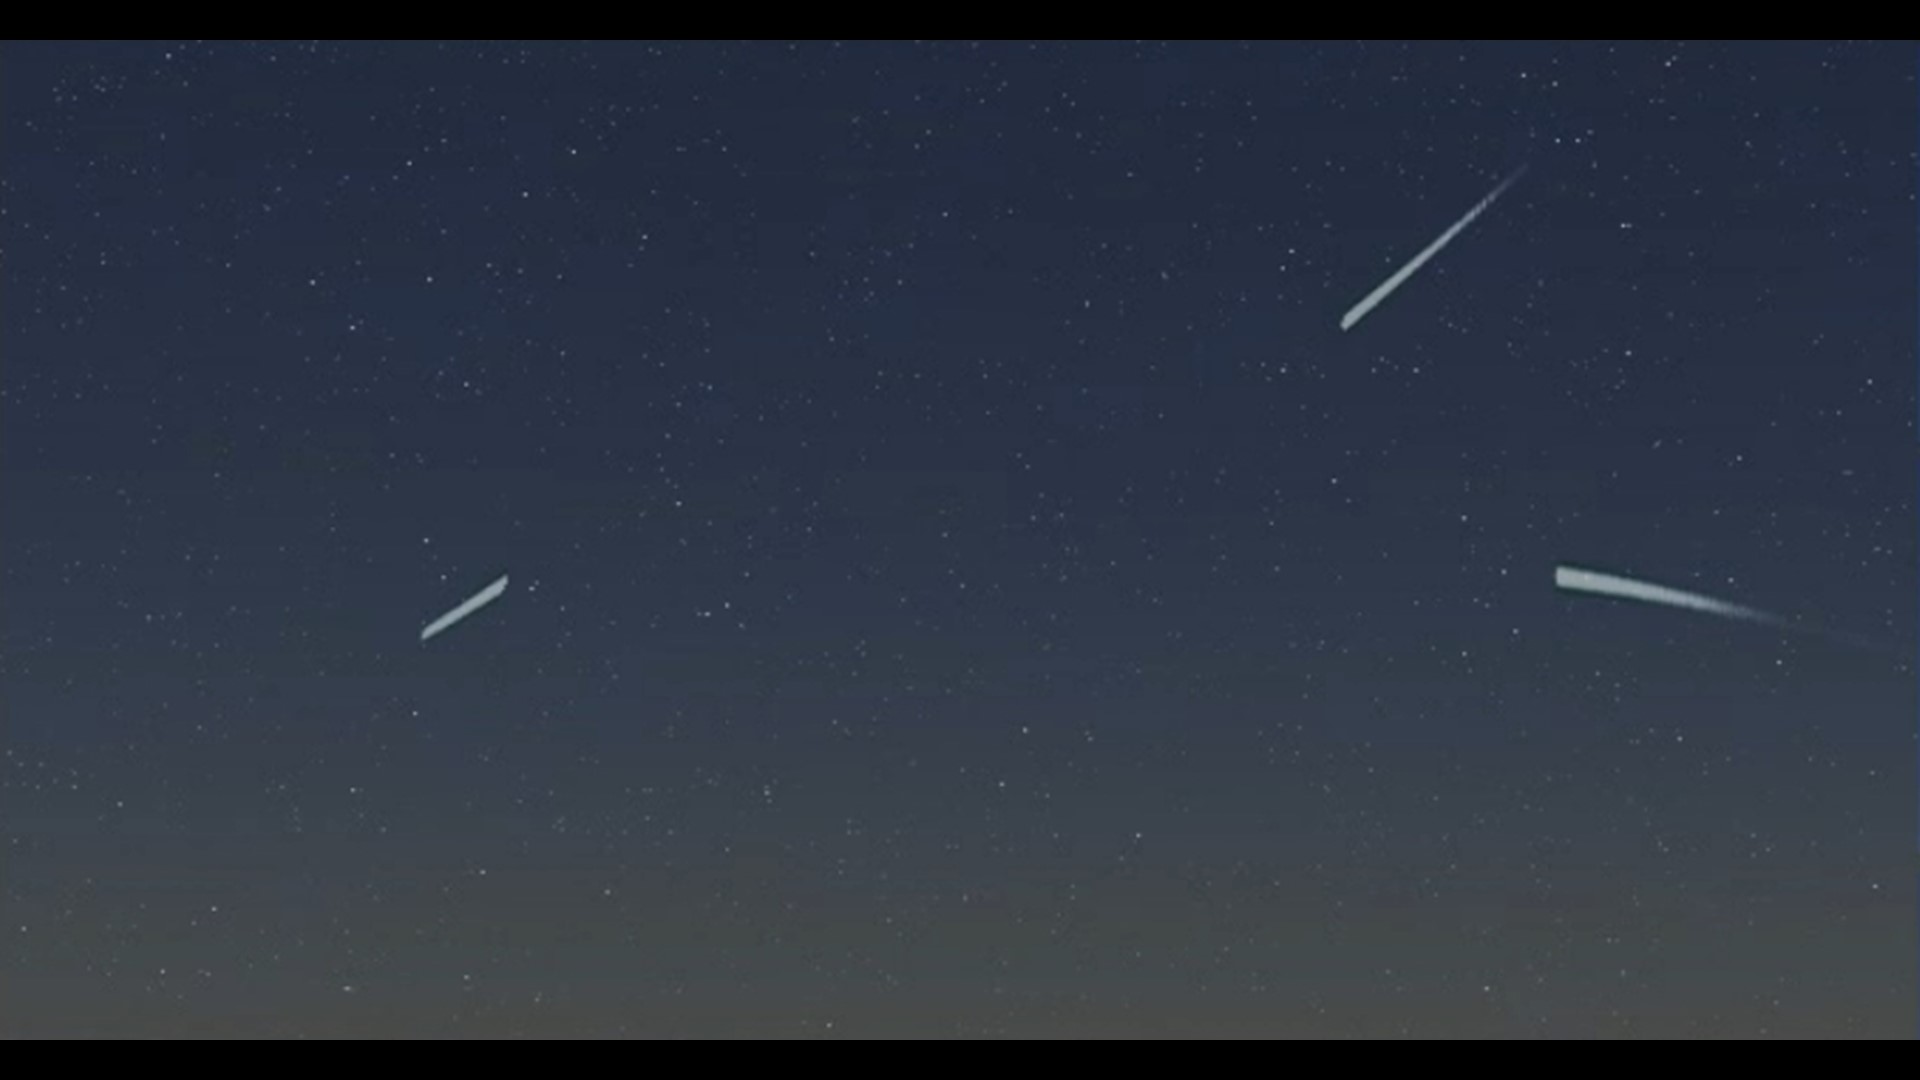 There's a meteor shower this week that's worth staying up late or waking up early for. Newswatch 16's John Hickey tells us all we need to know about this event.